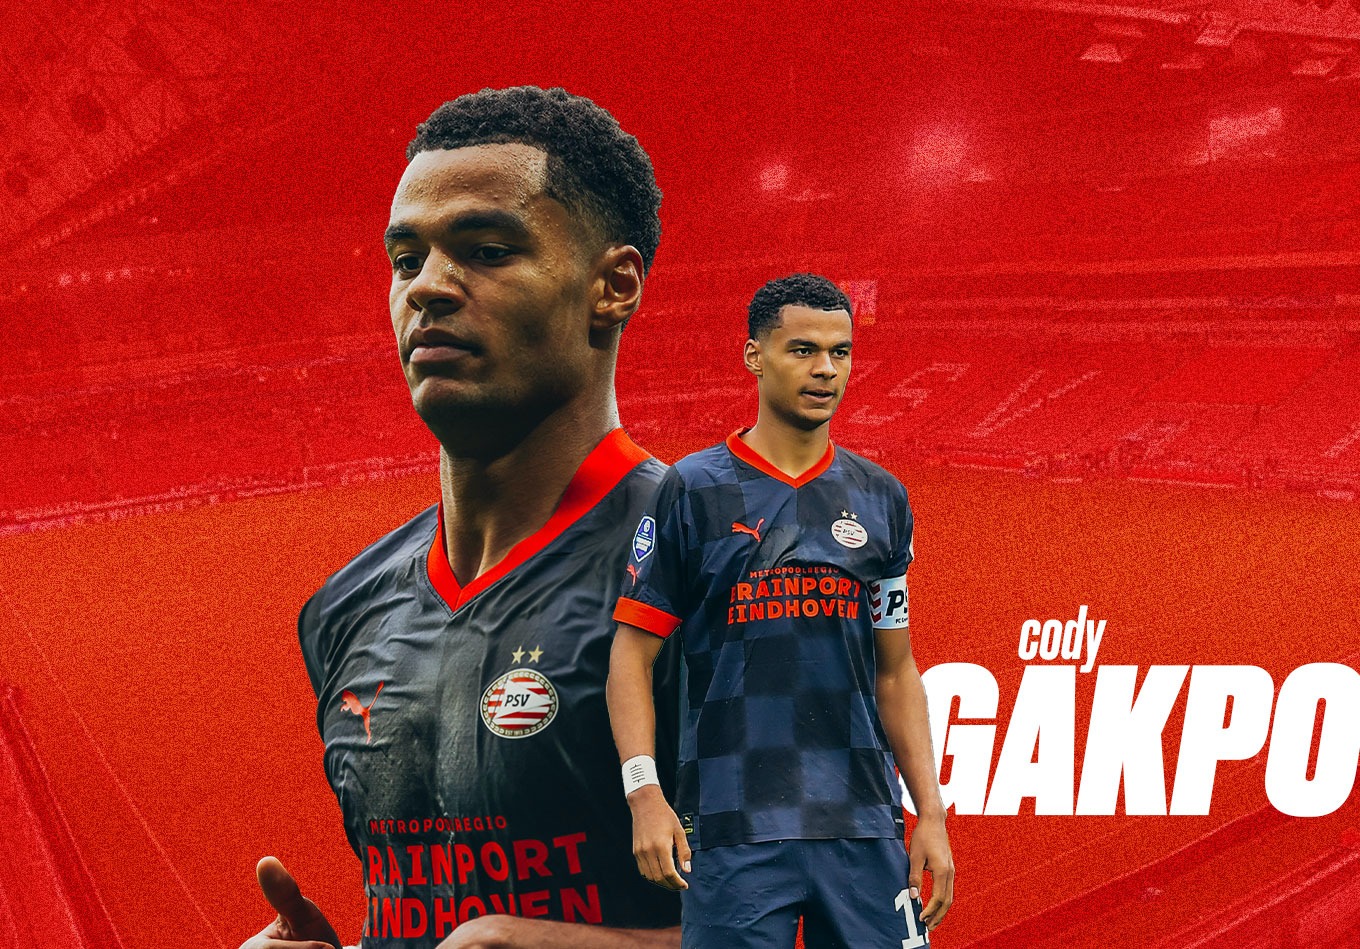 Will Cody Gakpo Be the Next Top-Level Attacker to Come out of the Eredivisie?